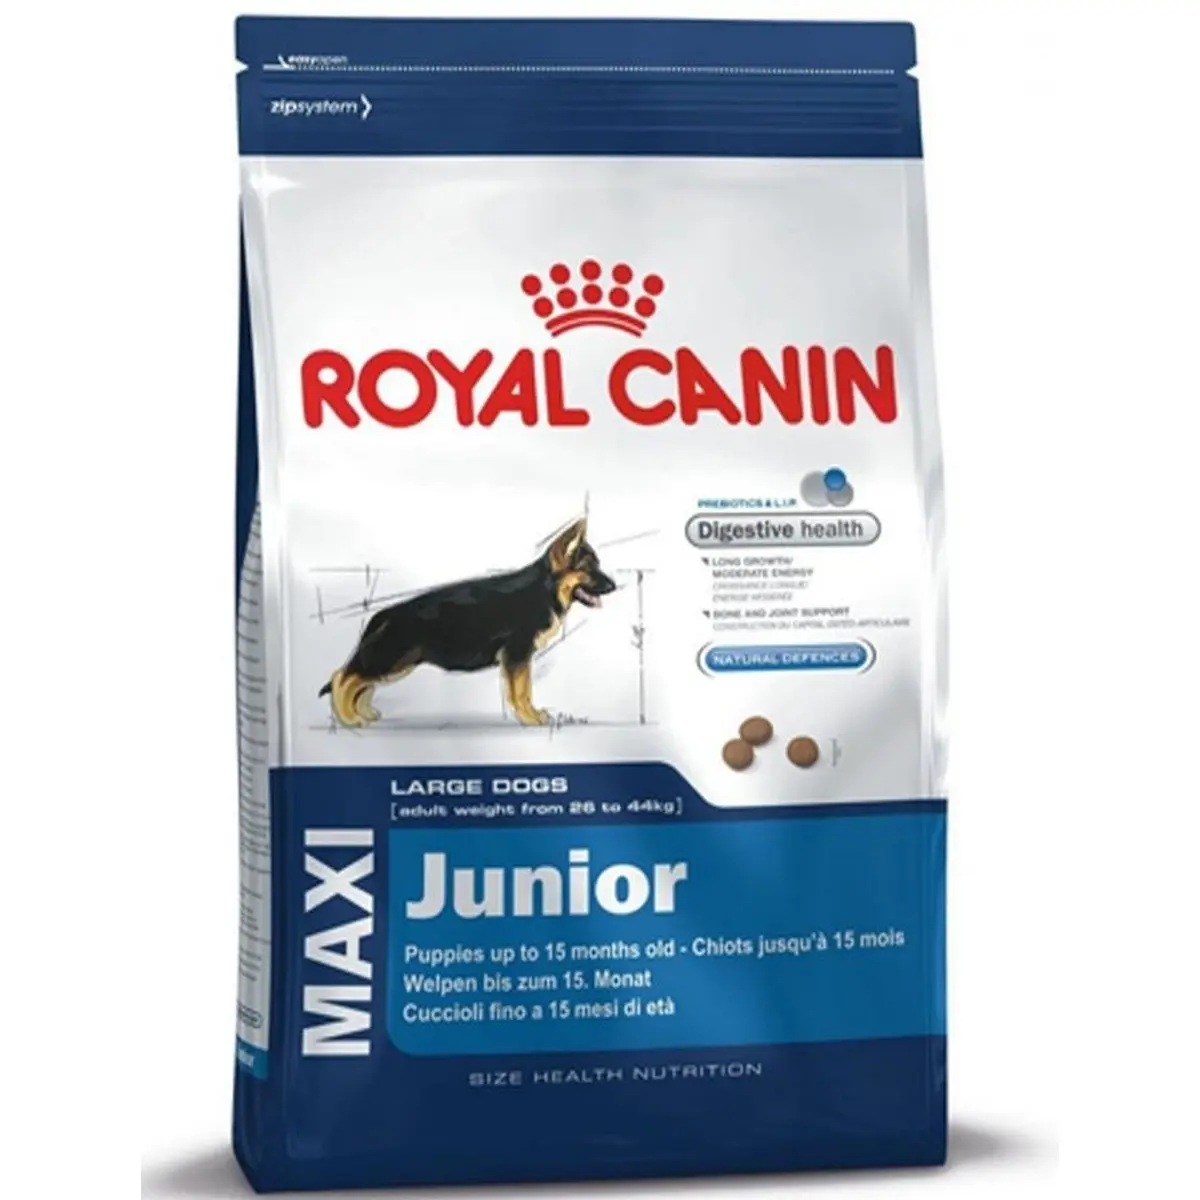 Royal Canine Size Health Nutrition Large Adult Dry Dog Food